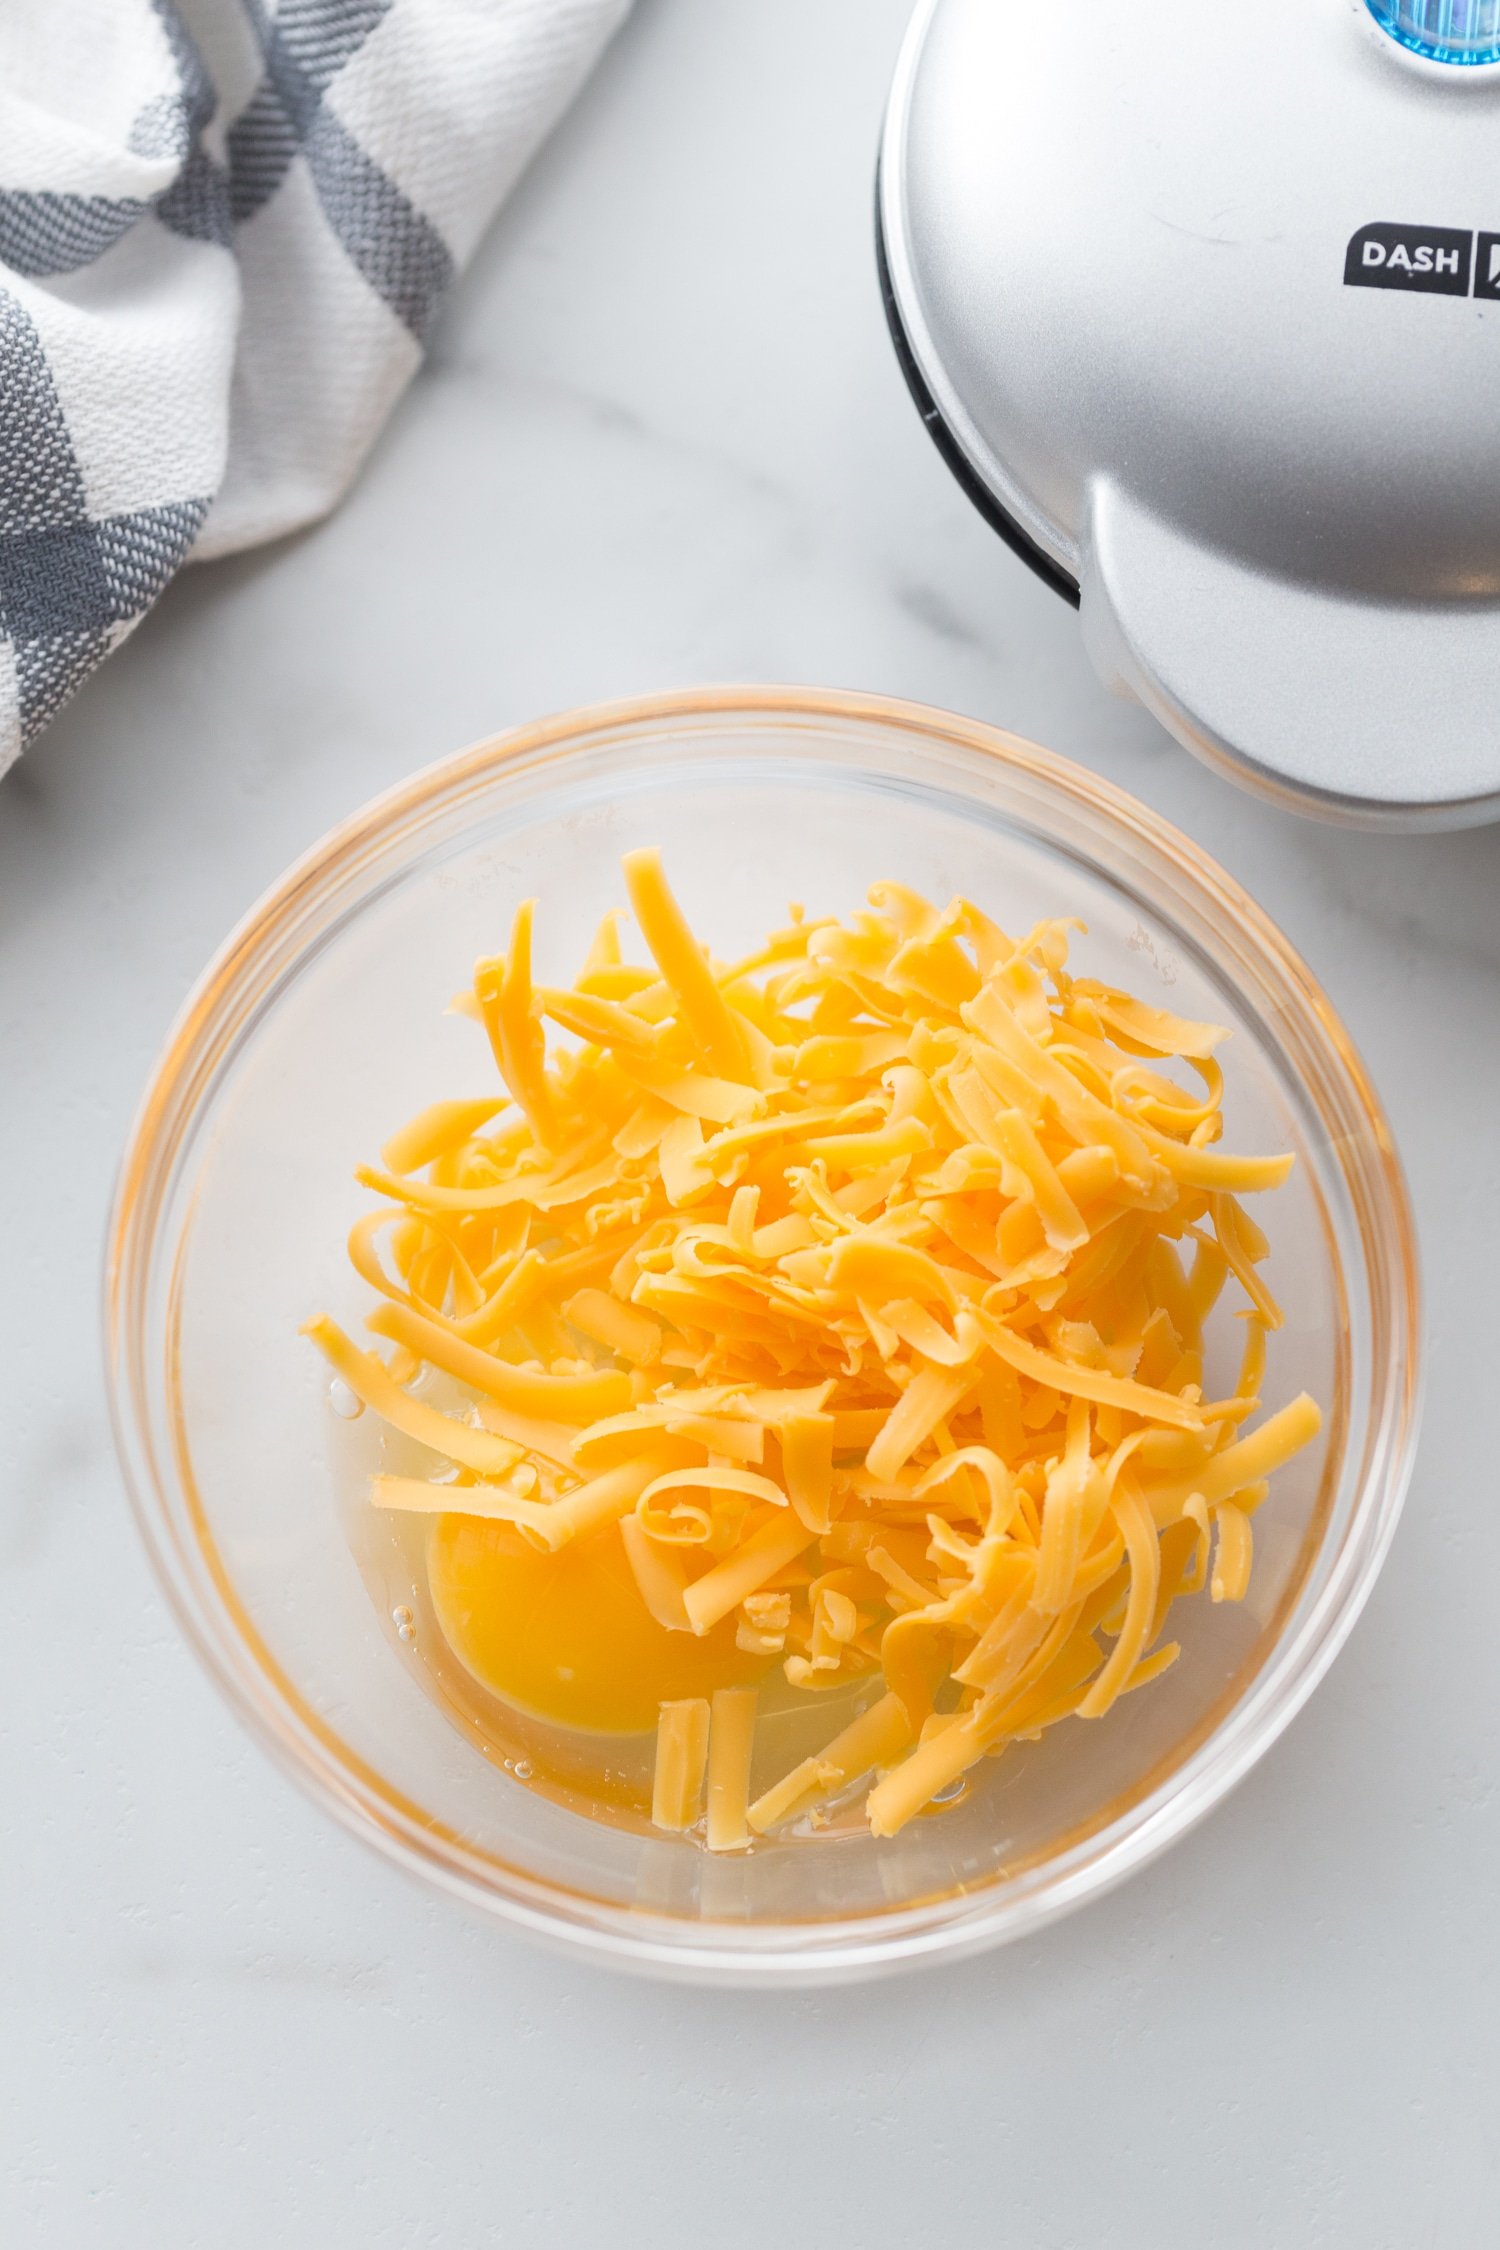 shredded cheese and egg in a bowl